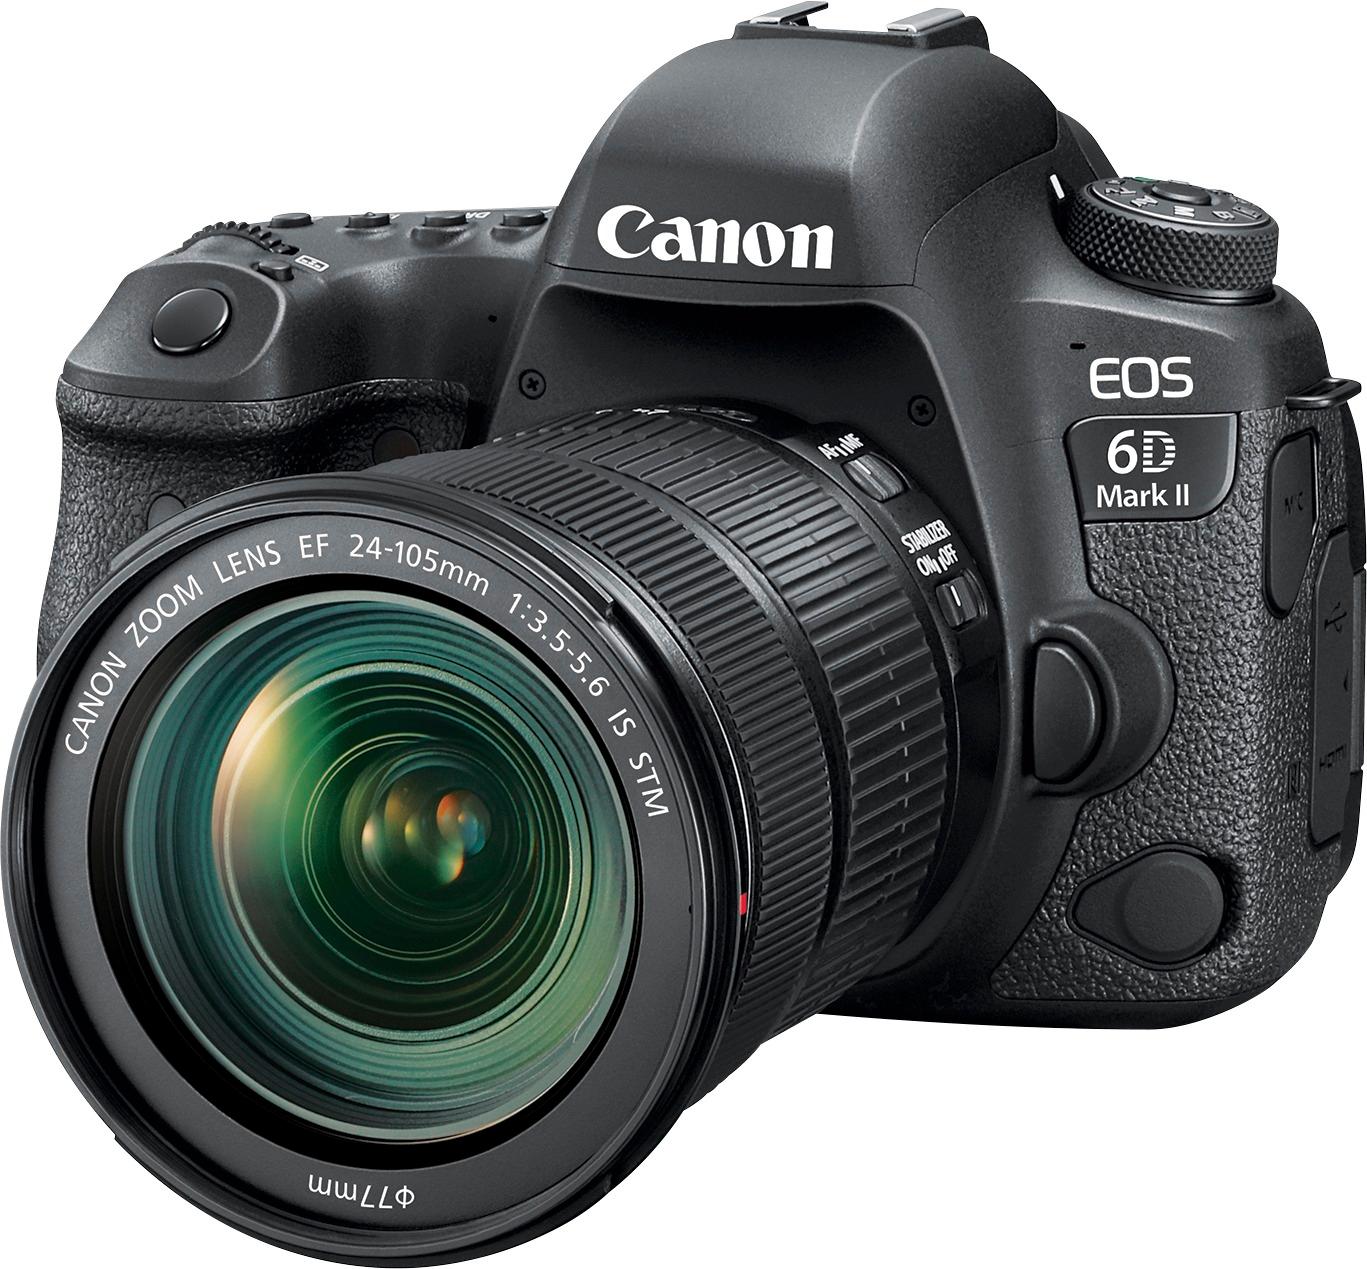 Left View: Canon - EOS 6D Mark II DSLR Camera with EF 24-105mm f/3.5-5.6 IS STM Lens - Black